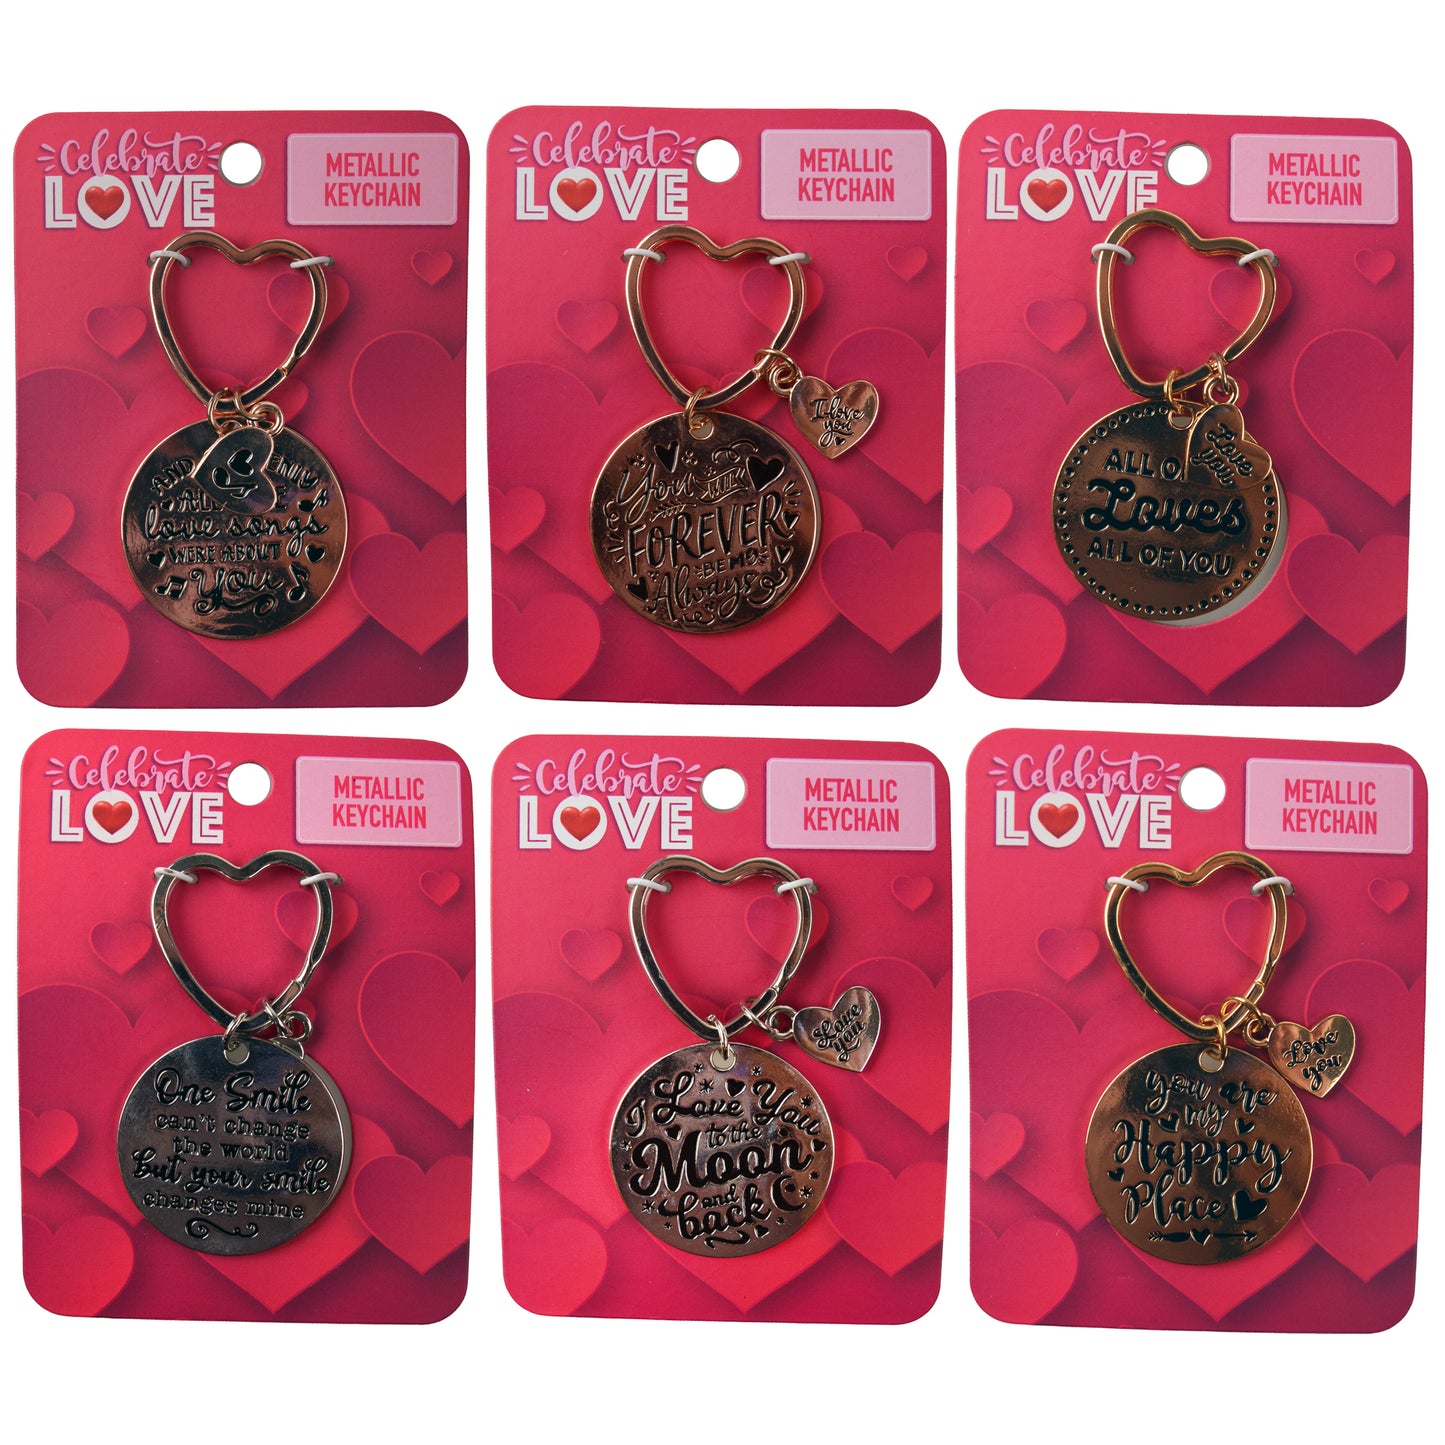 ITEM NUMBER 023458L VALENTINES DAY KEY CHAIN- STORE SURPLUS NO DISPLAY 6 PIECES PER PACK